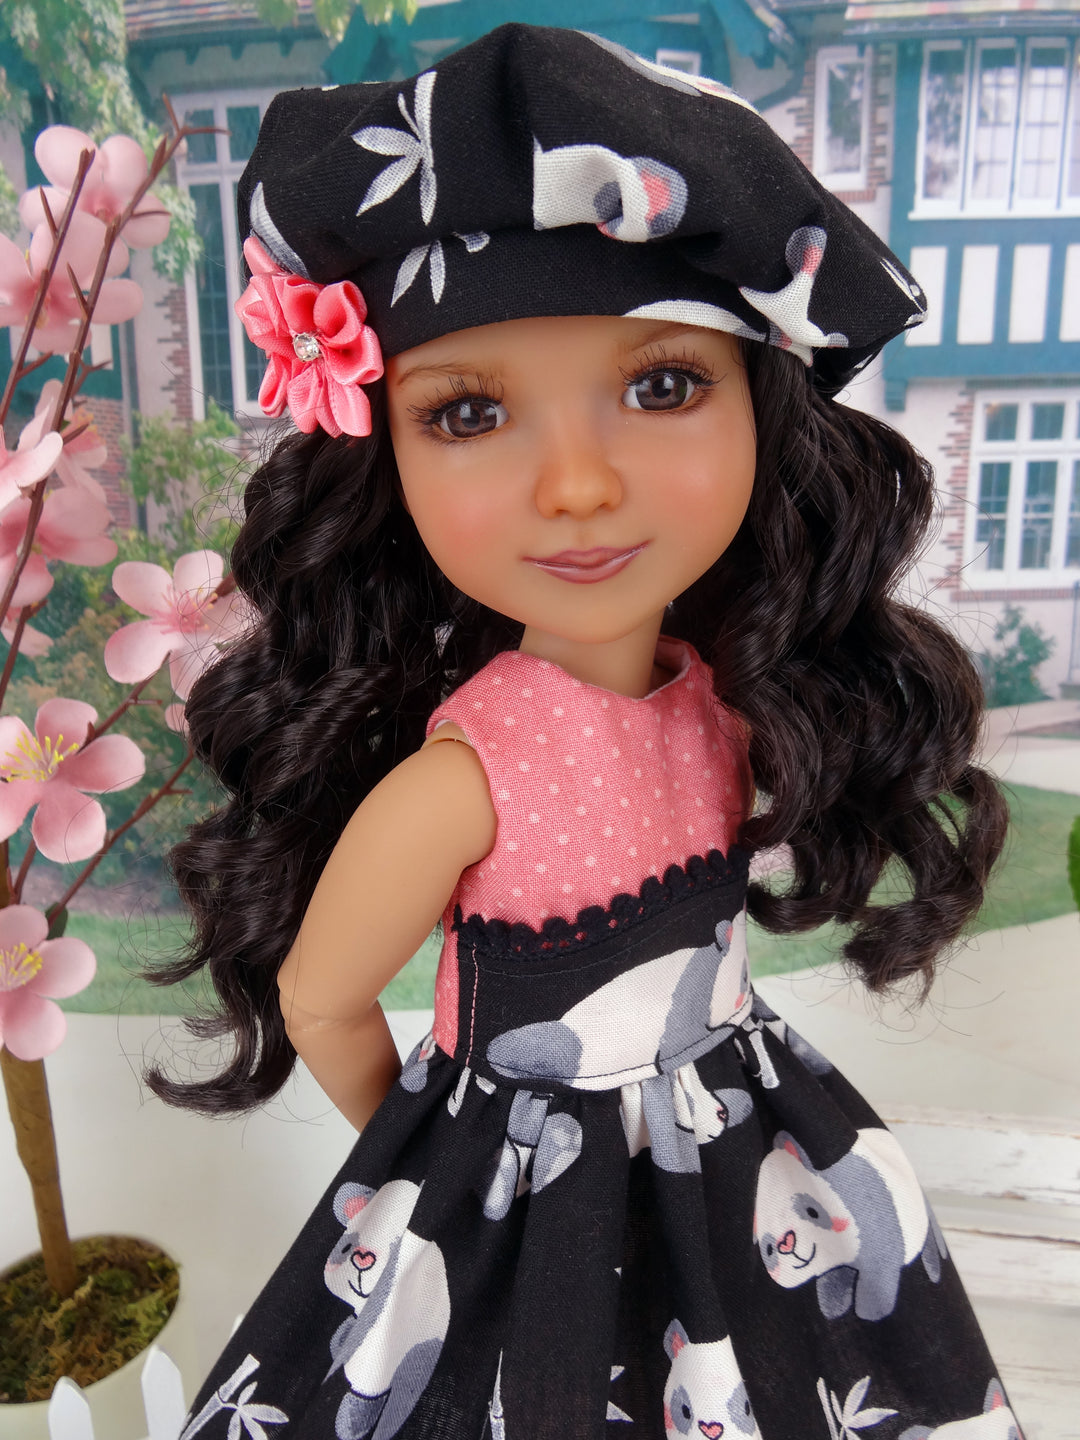 Pretty Panda - dress ensemble with shoes for Ruby Red Fashion Friends doll